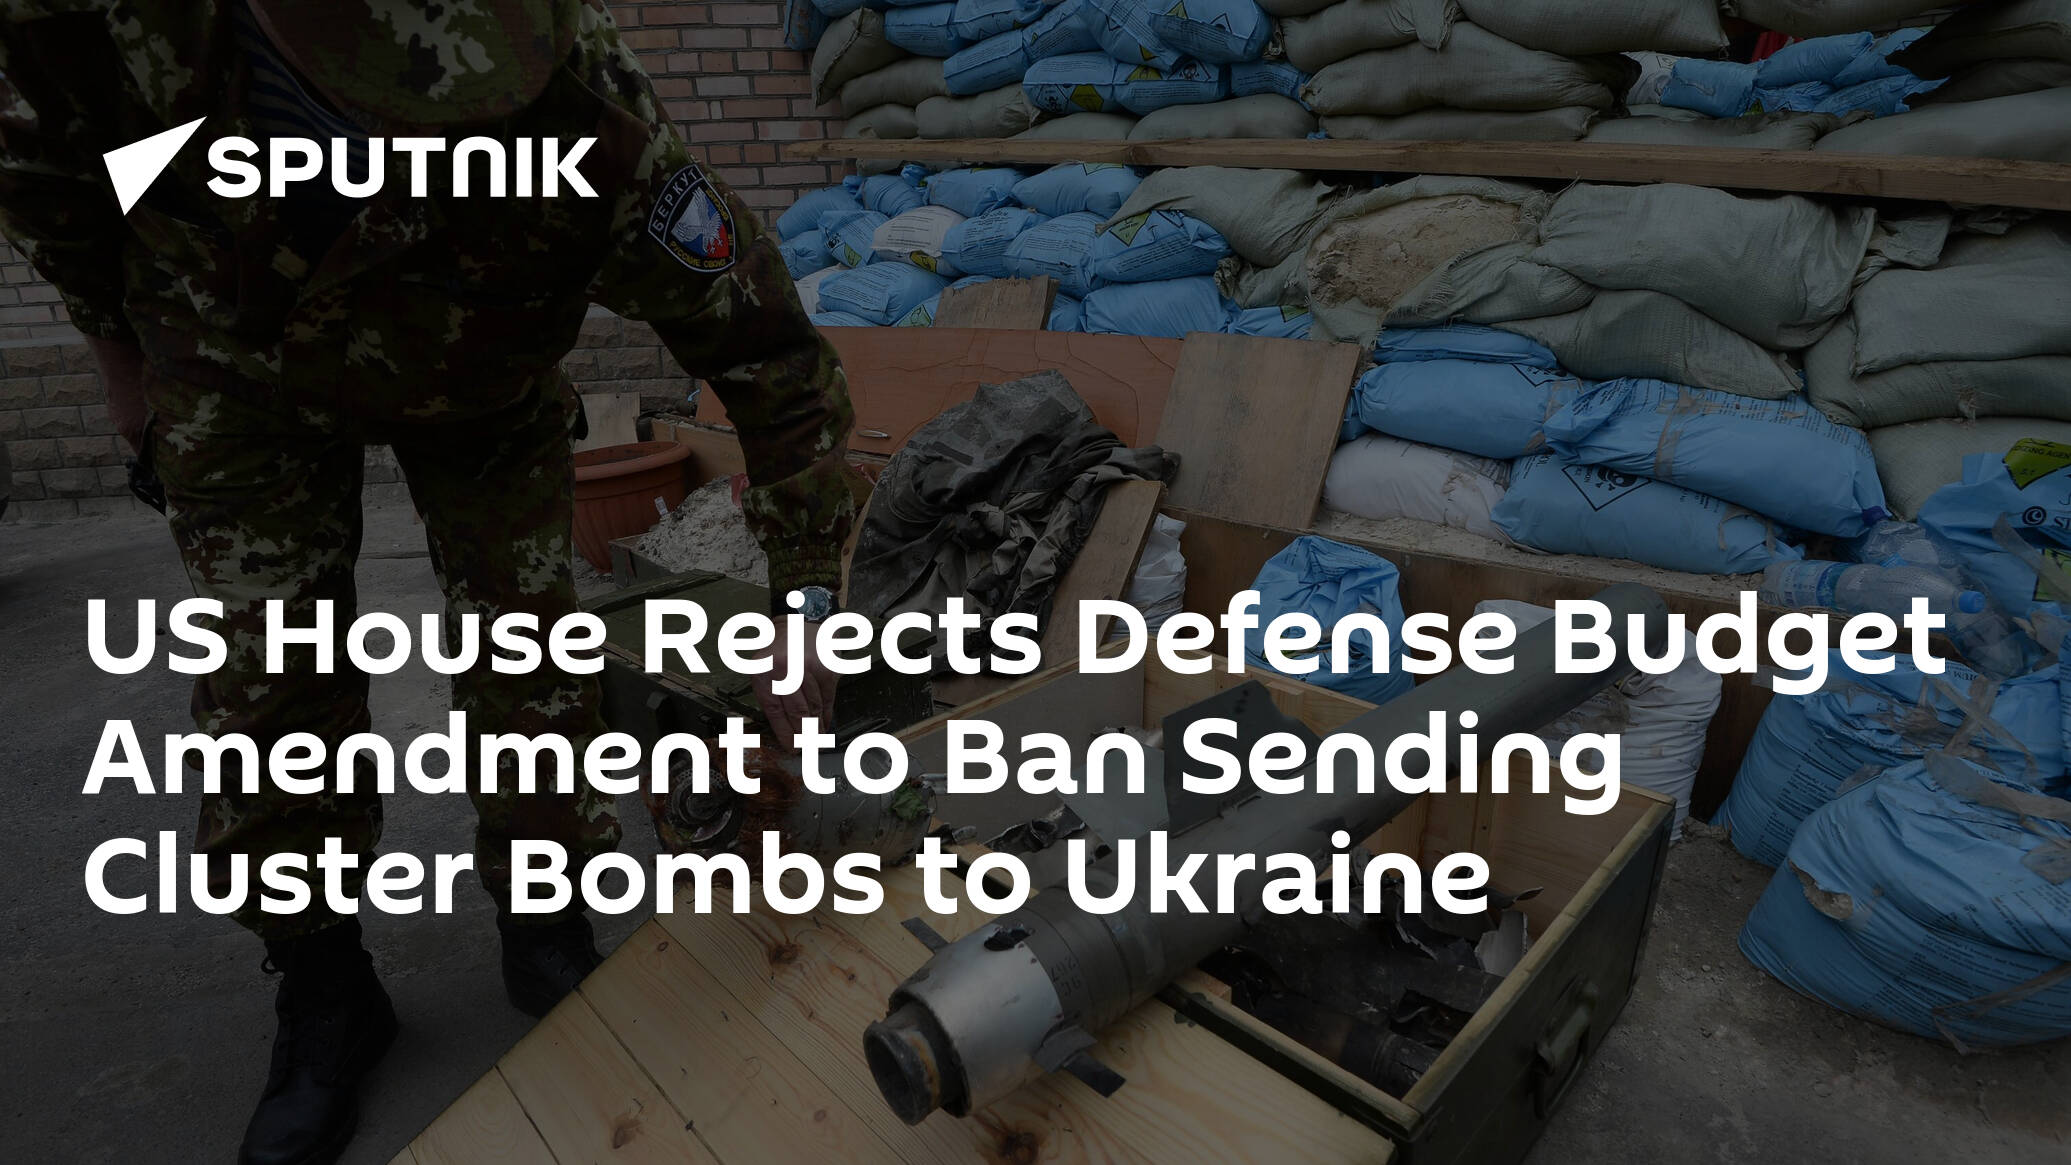 US House Rejects Defense Budget Amendment to Ban Sending Cluster Bombs to Ukraine